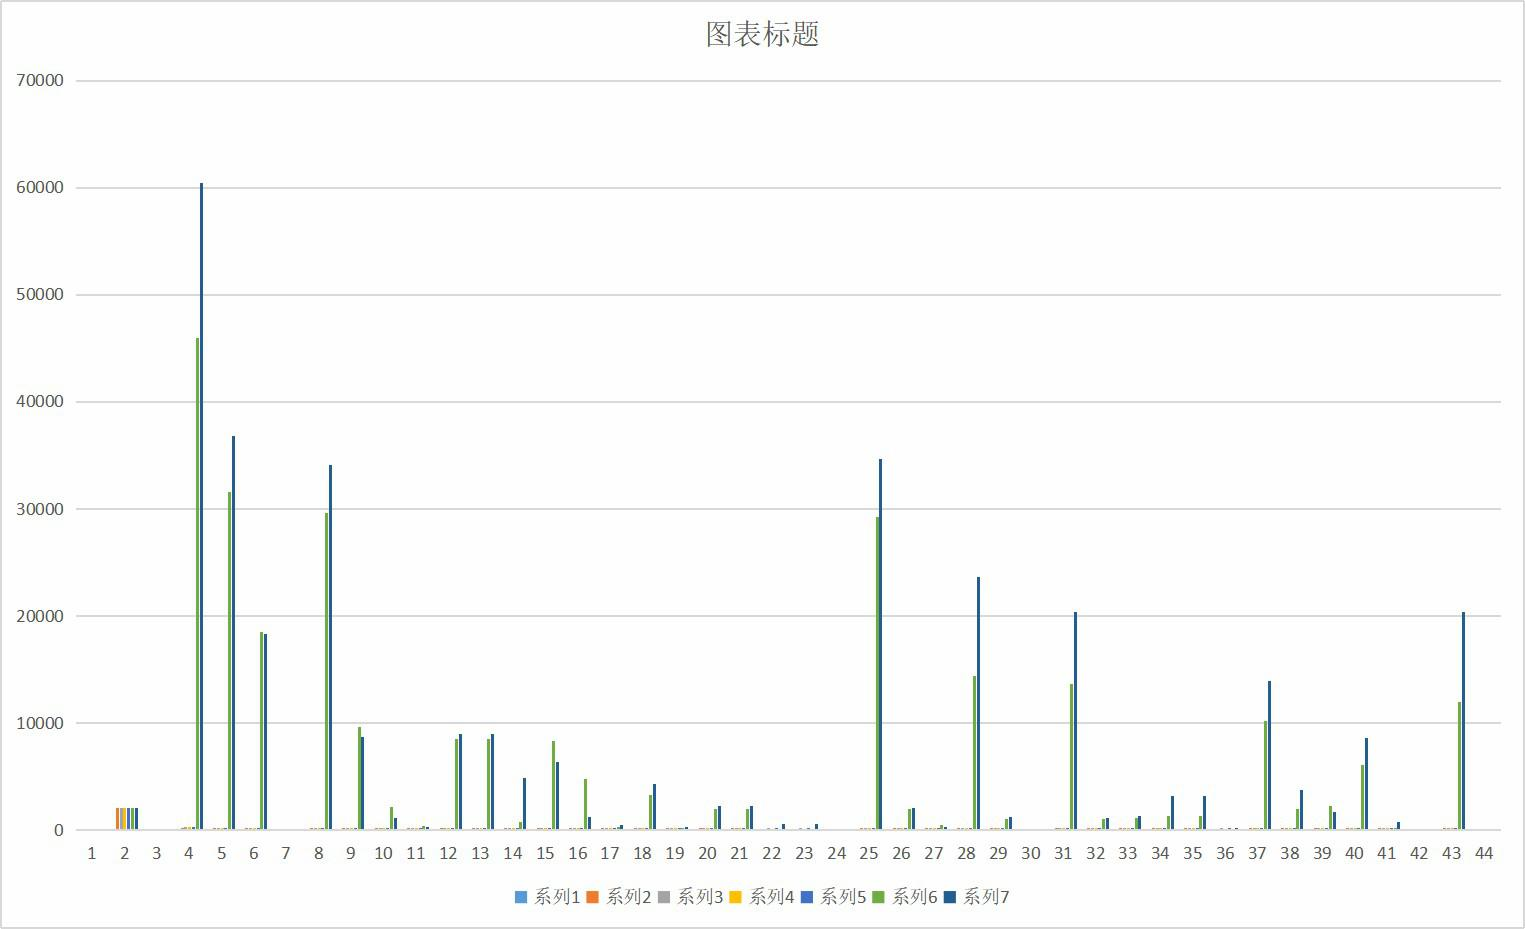 Sales of hotels and restaurants above Designated Size in Qinghai Province (2006-2011)